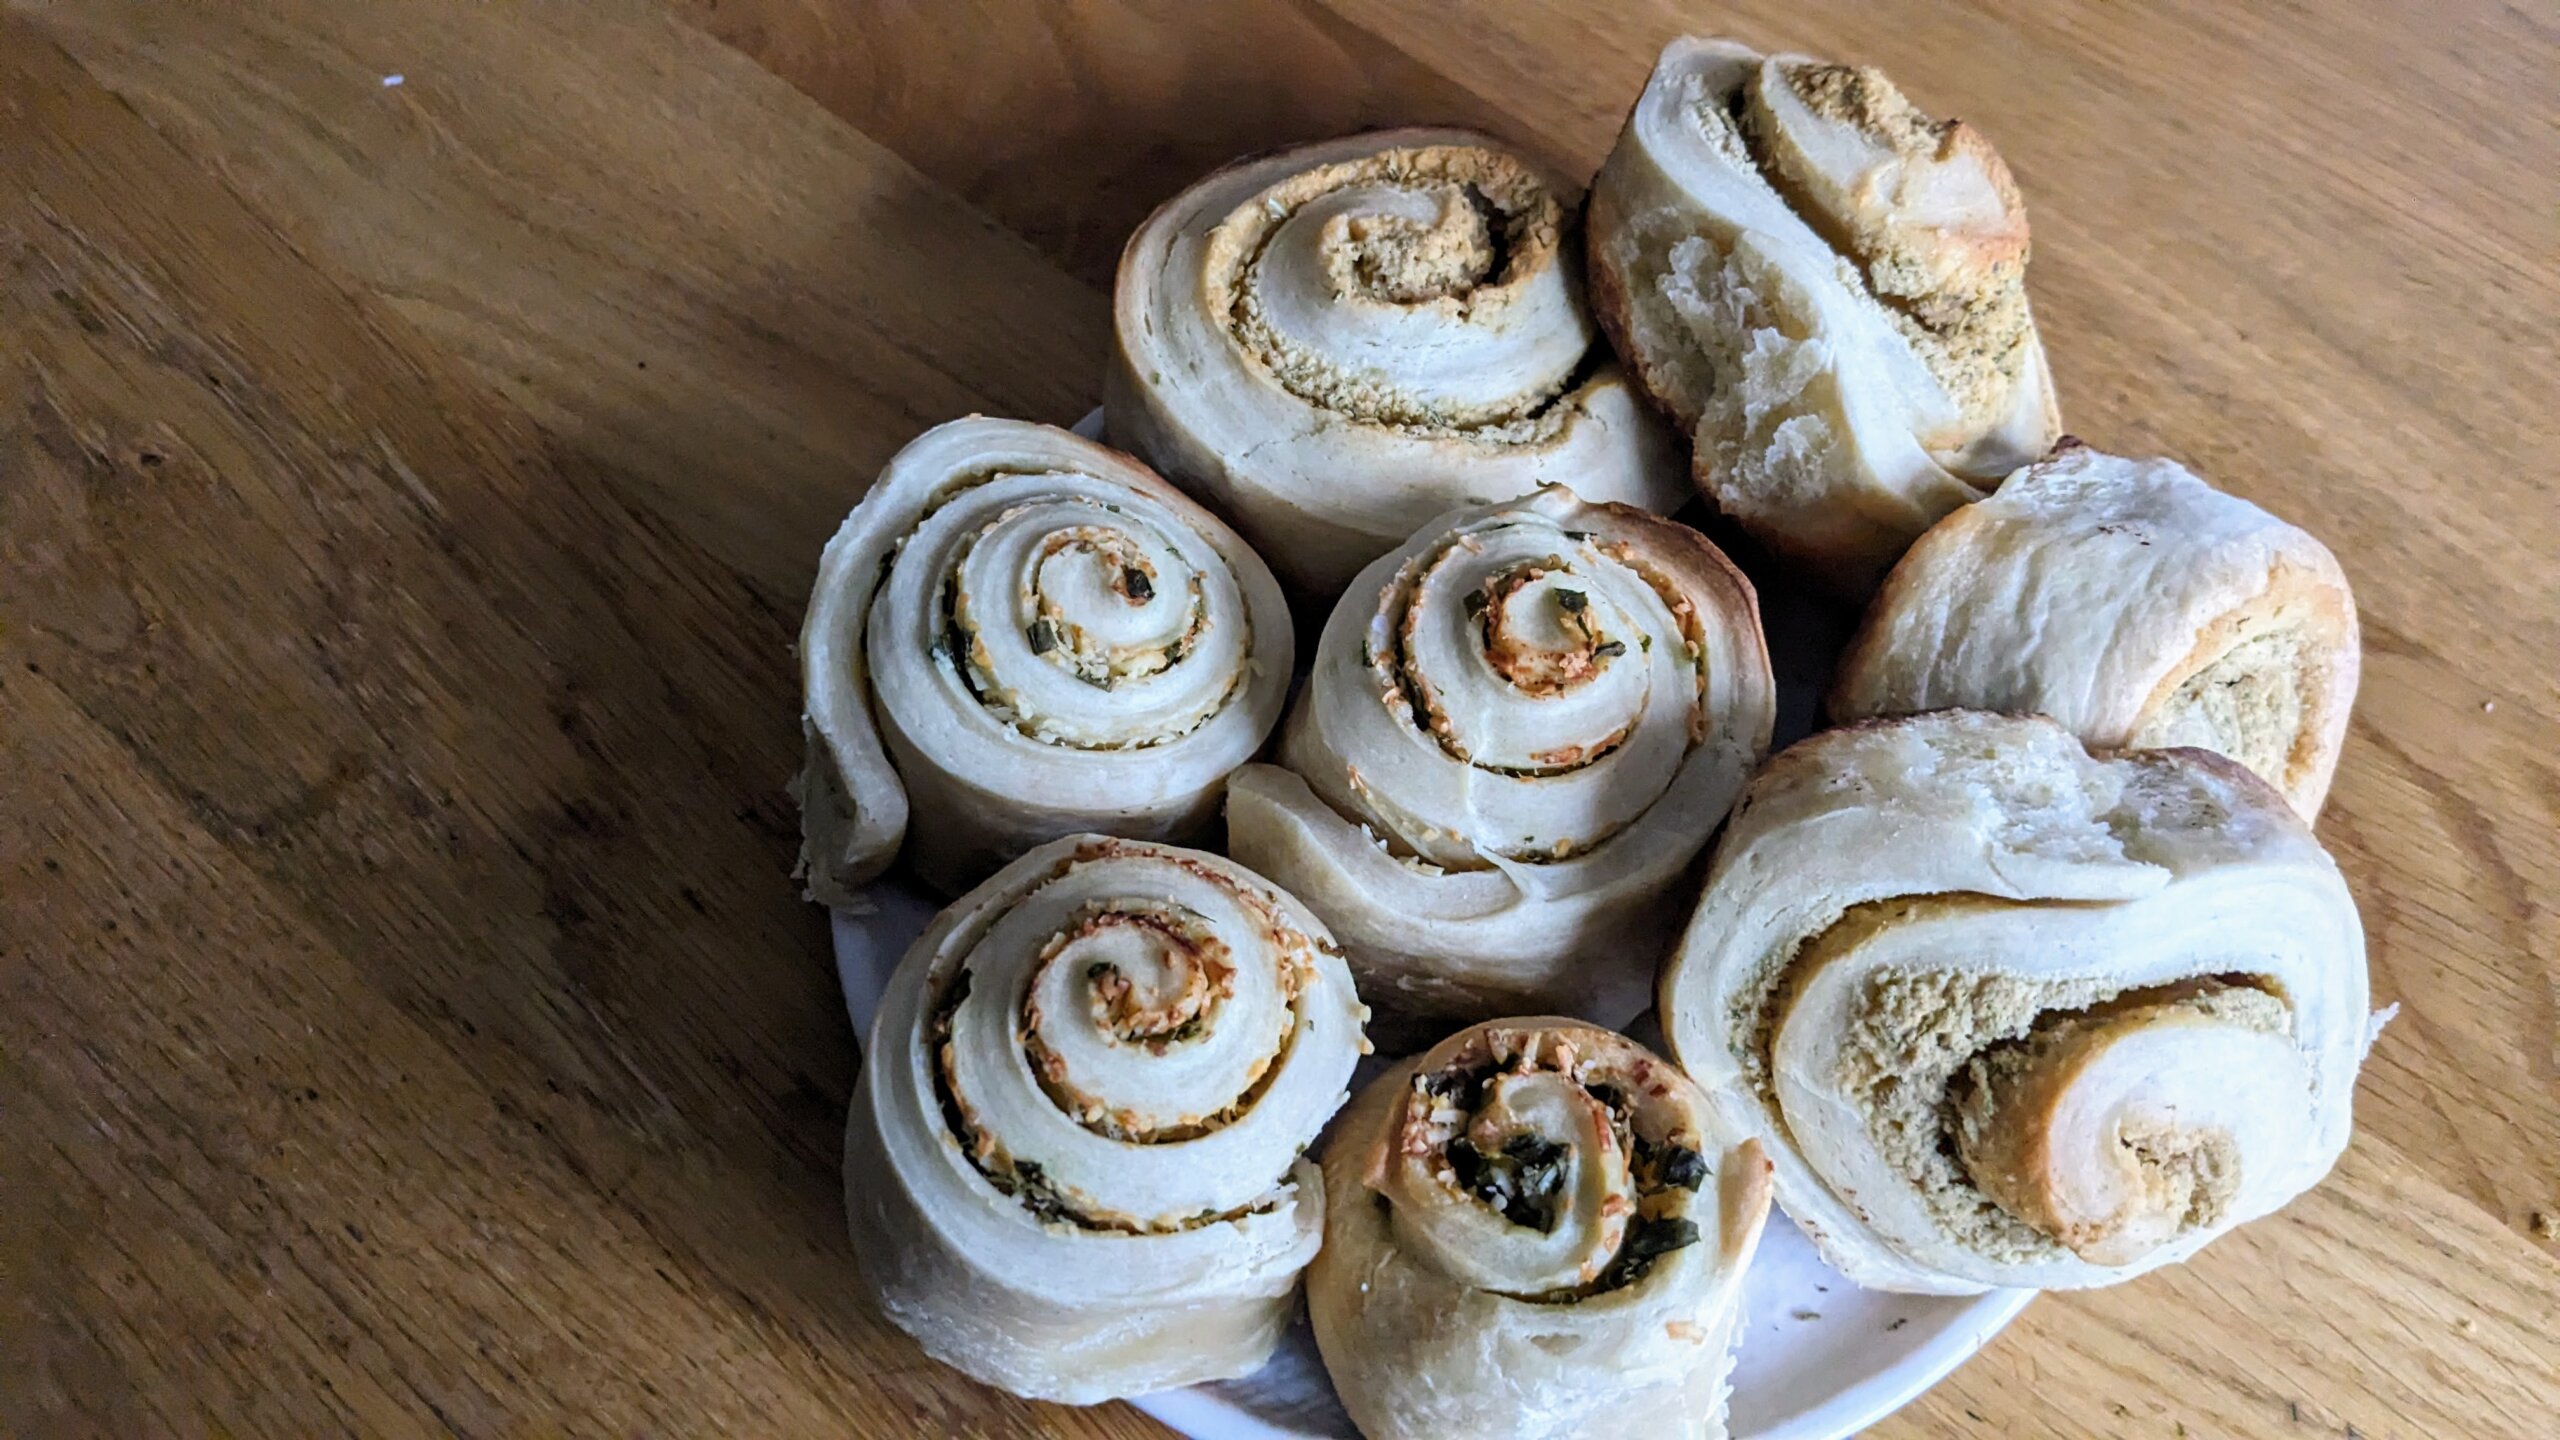 Savory rolls on a wooden counter